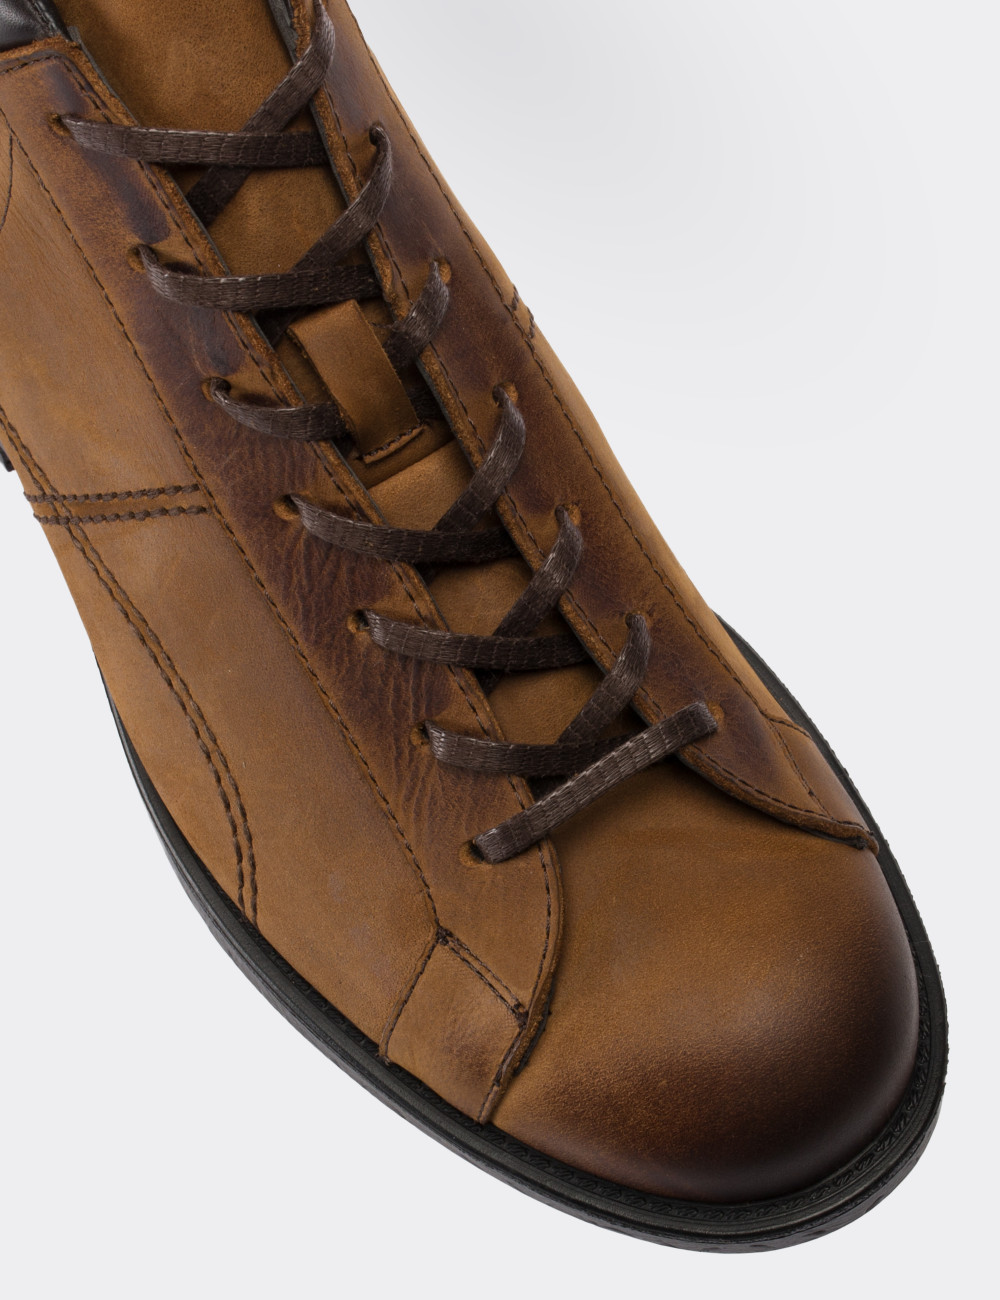 Brown Nubuck Leather Boots - 01760MTRNC02